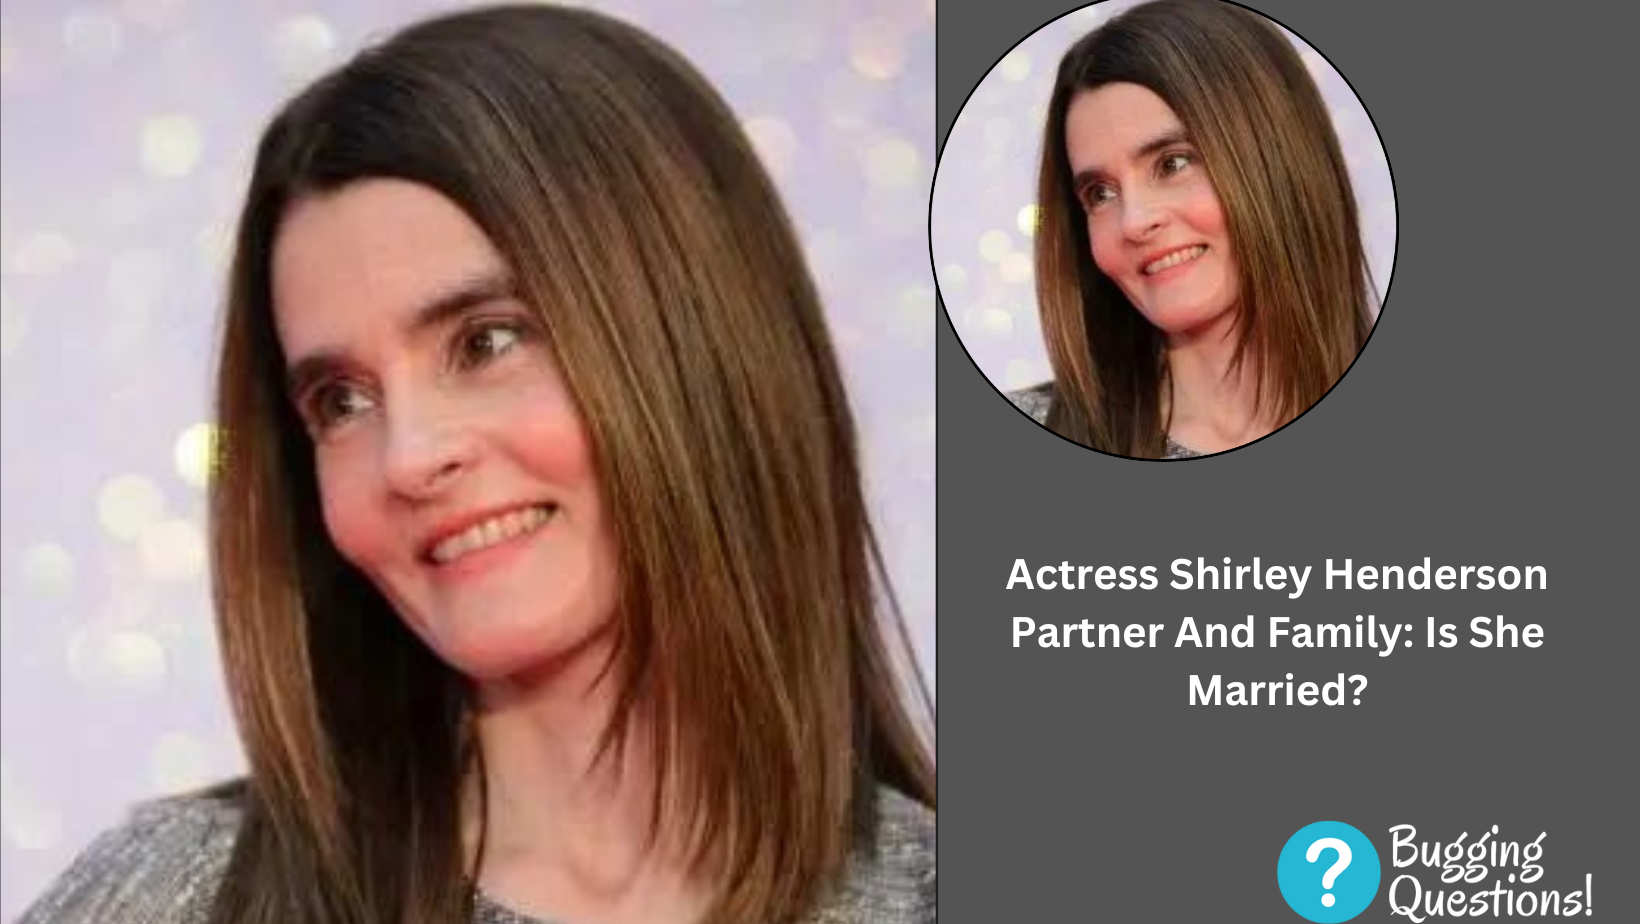 Actress Shirley Henderson Partner And Family